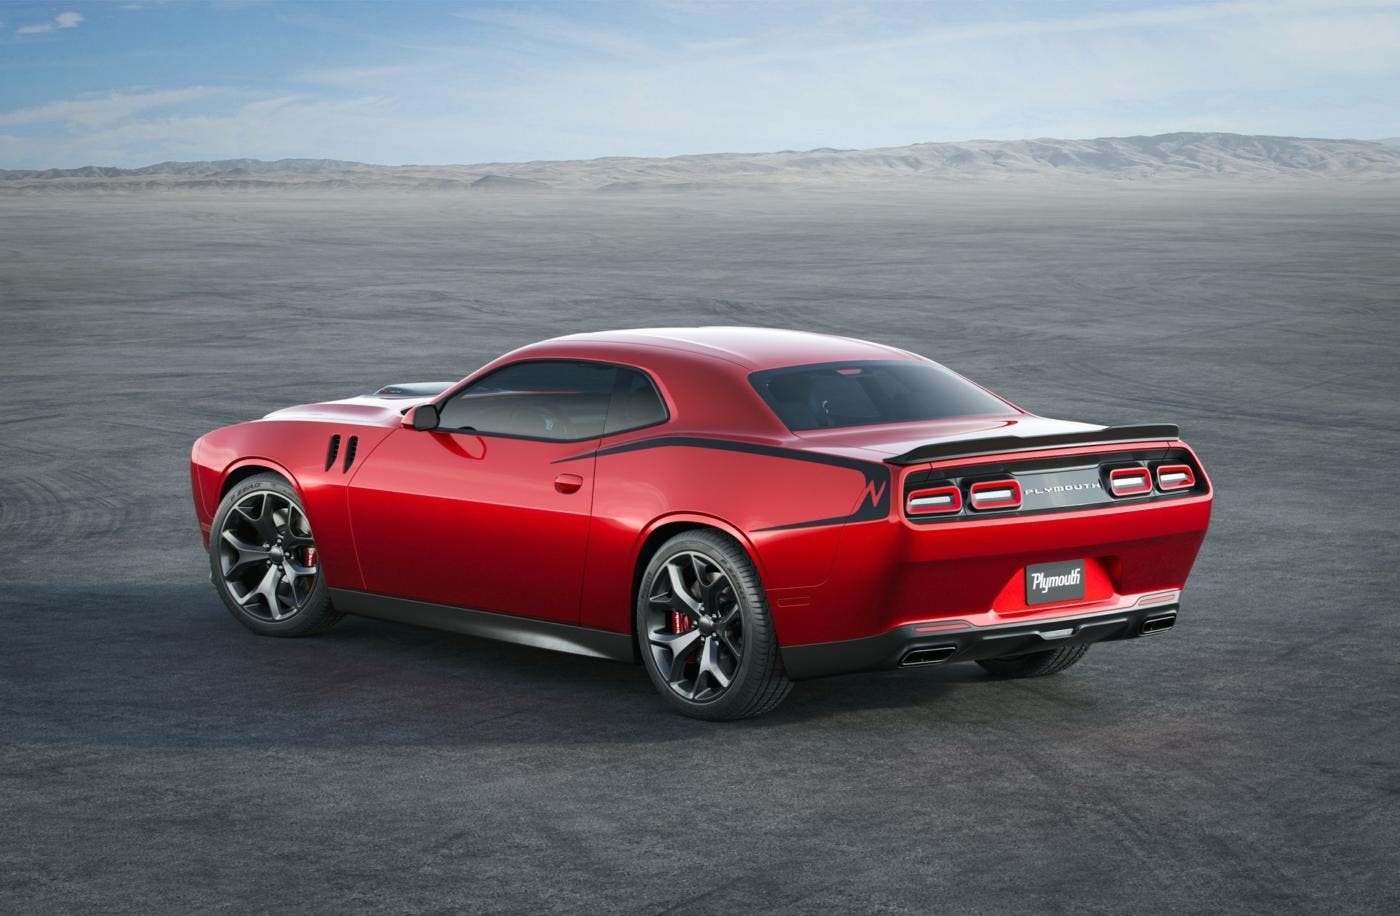 Dodge Challenger Playmouth Barracuda render